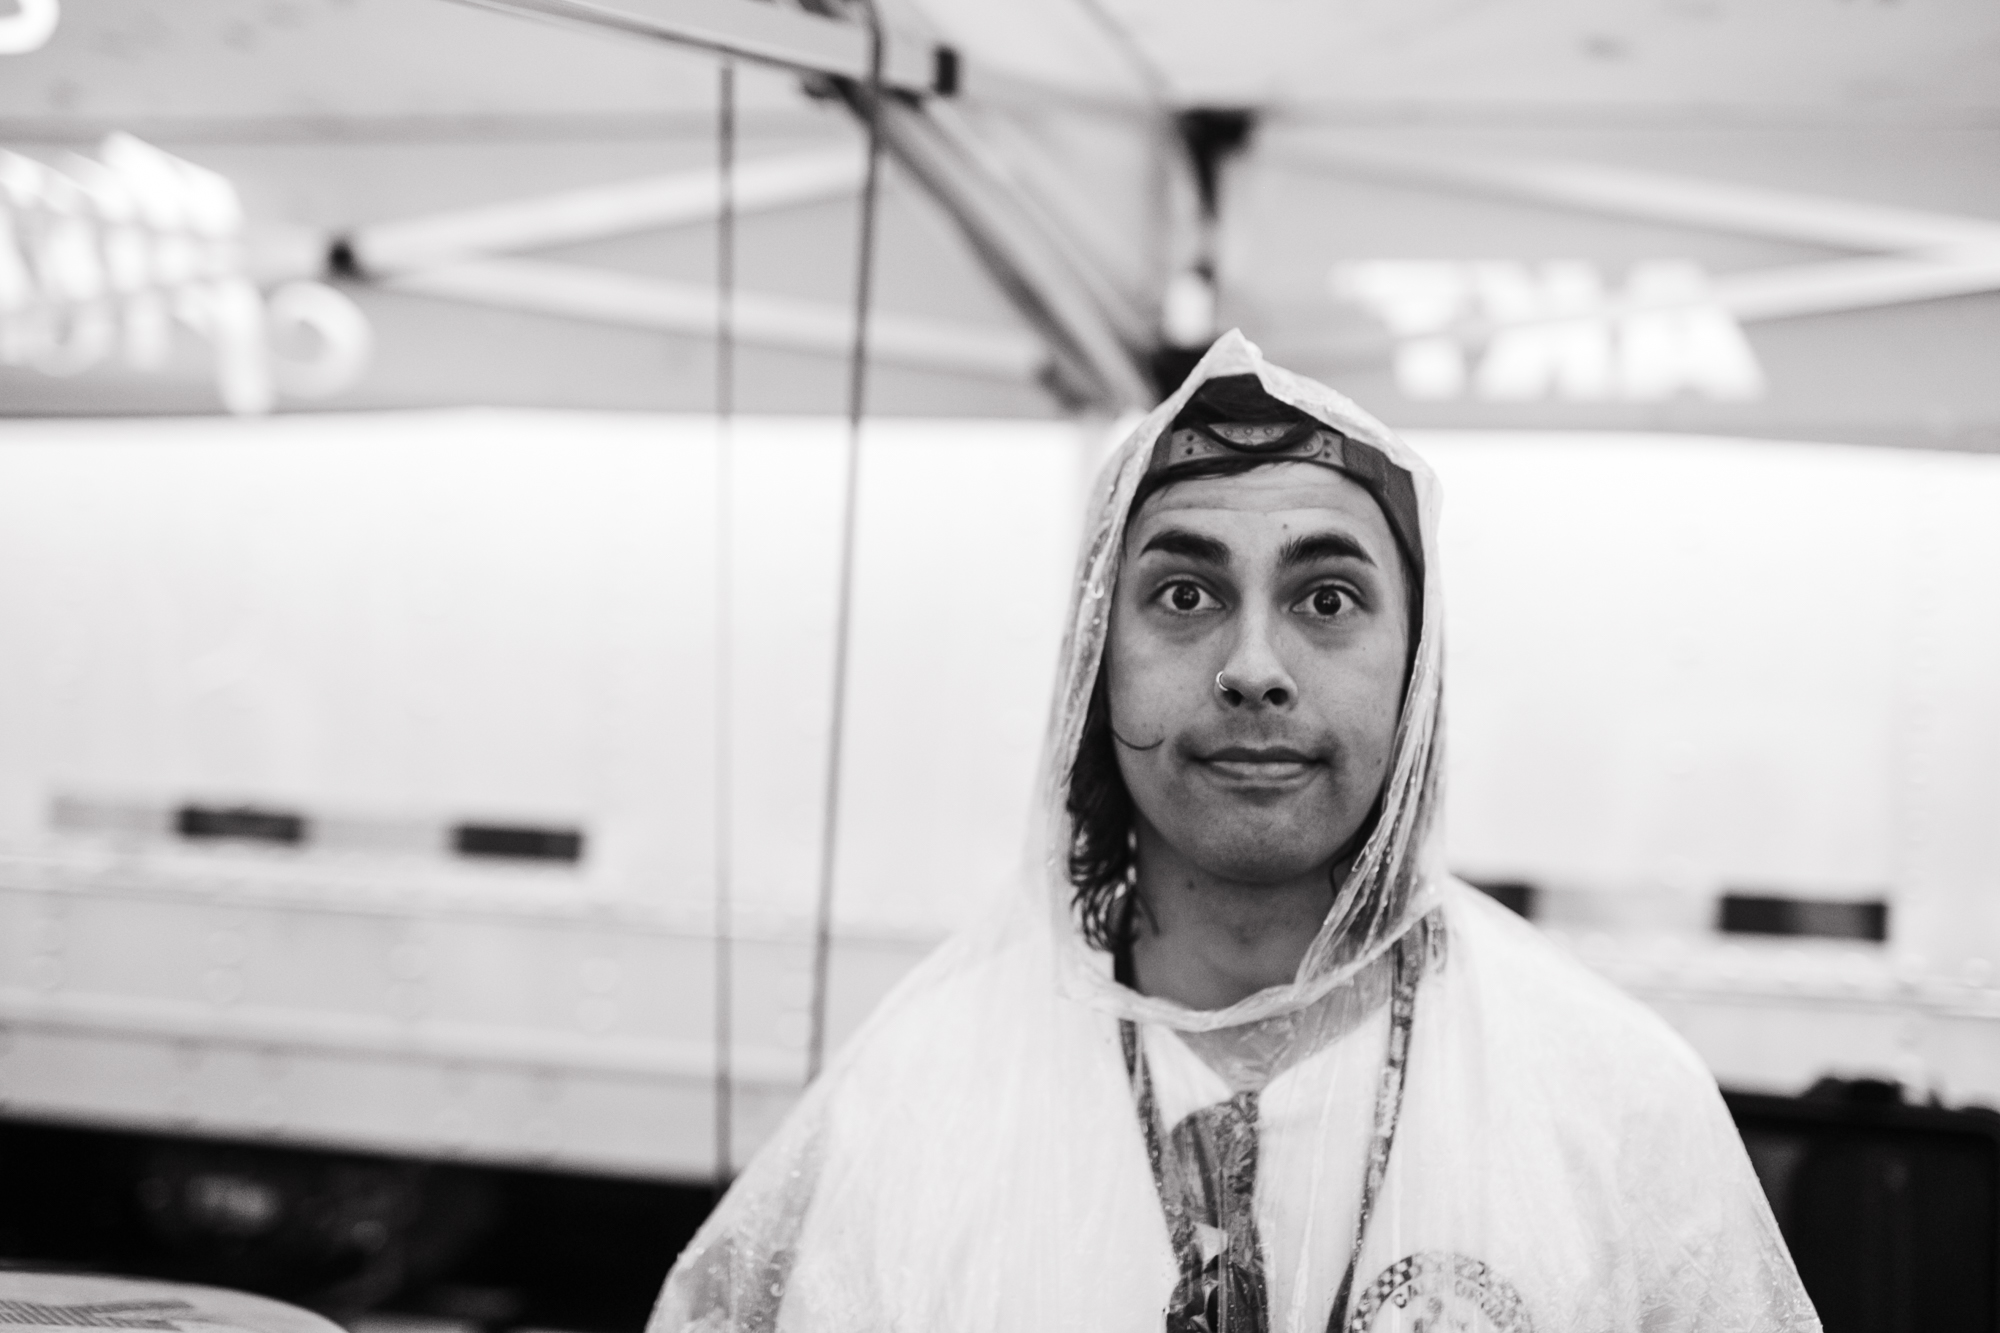 Vic Fuentes in "Do you even Poncho?"